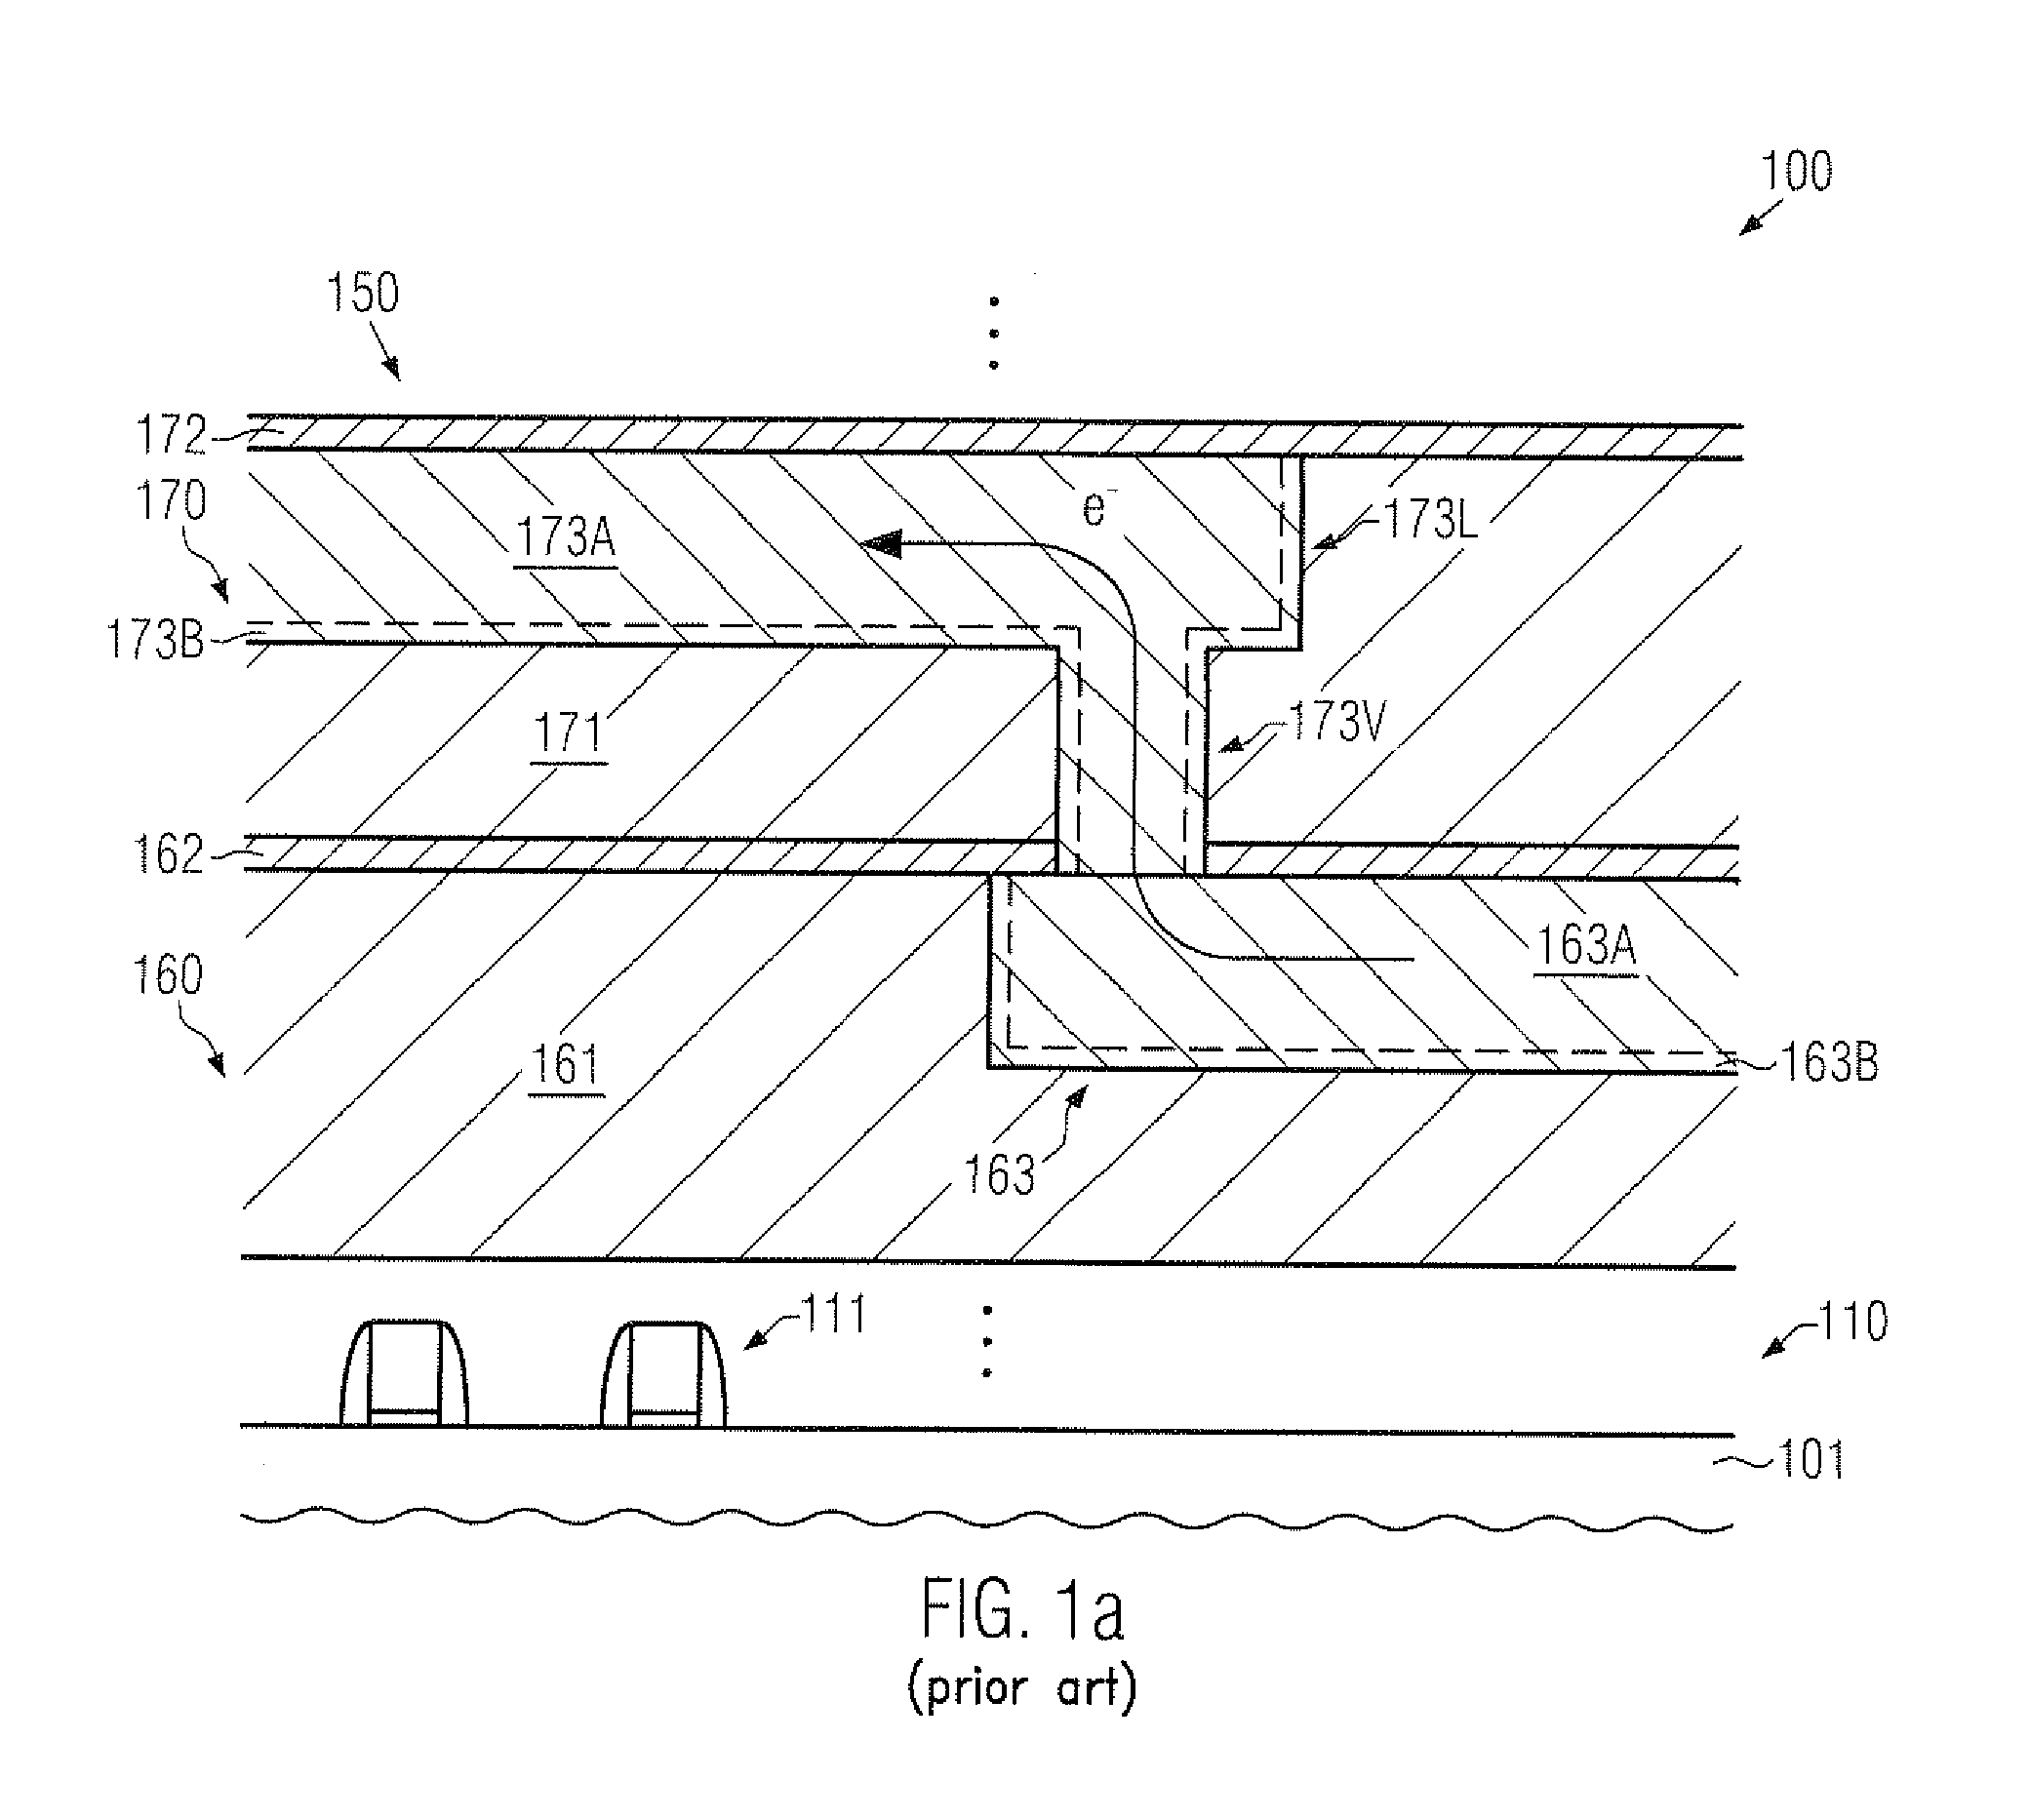 SEMICONDUCTOR DEVICE COMPRISING METAL-BASED eFUSES OF ENHANCED PROGRAMMING EFFICIENCY BY ENHANCING METAL AGGLOMERATION AND/OR VOIDING